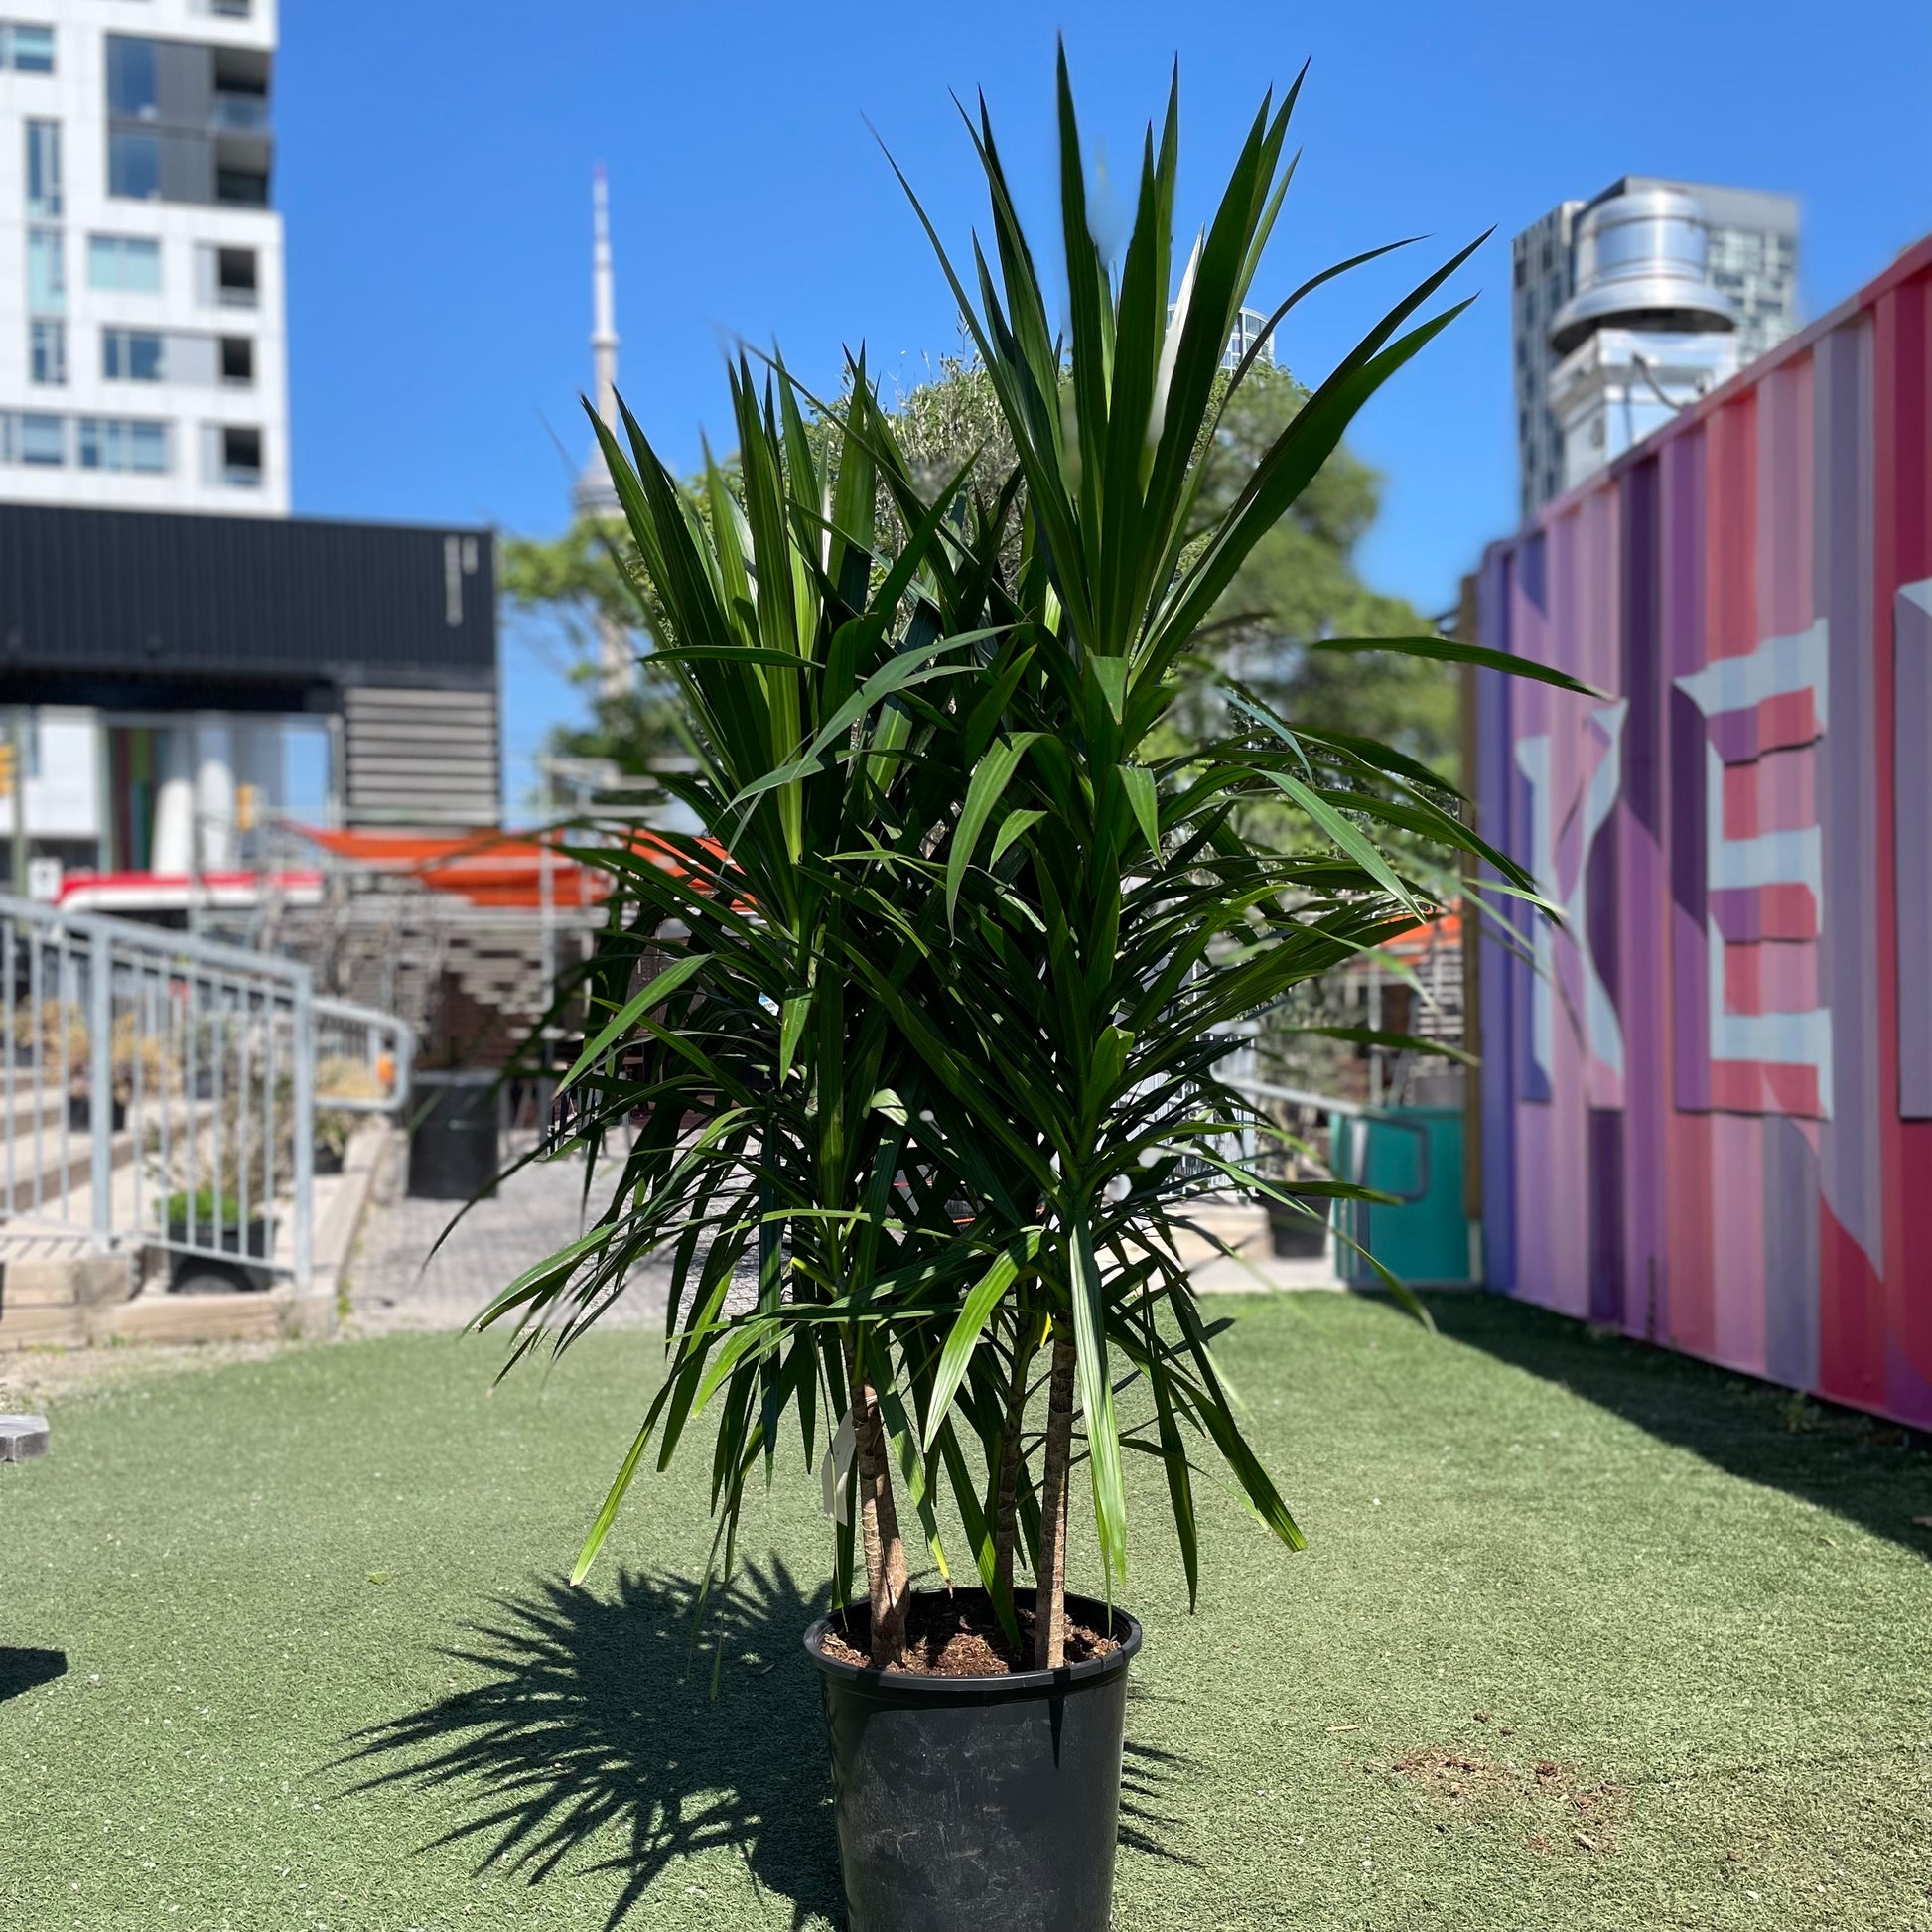 Madagascar Dragon tree, Dragon Tree, Tarzan Dragon Tree (Dracaena marginata) in a 14 inch pot. Indoor plant for sale by Promise Supply for delivery and pickup in Toronto